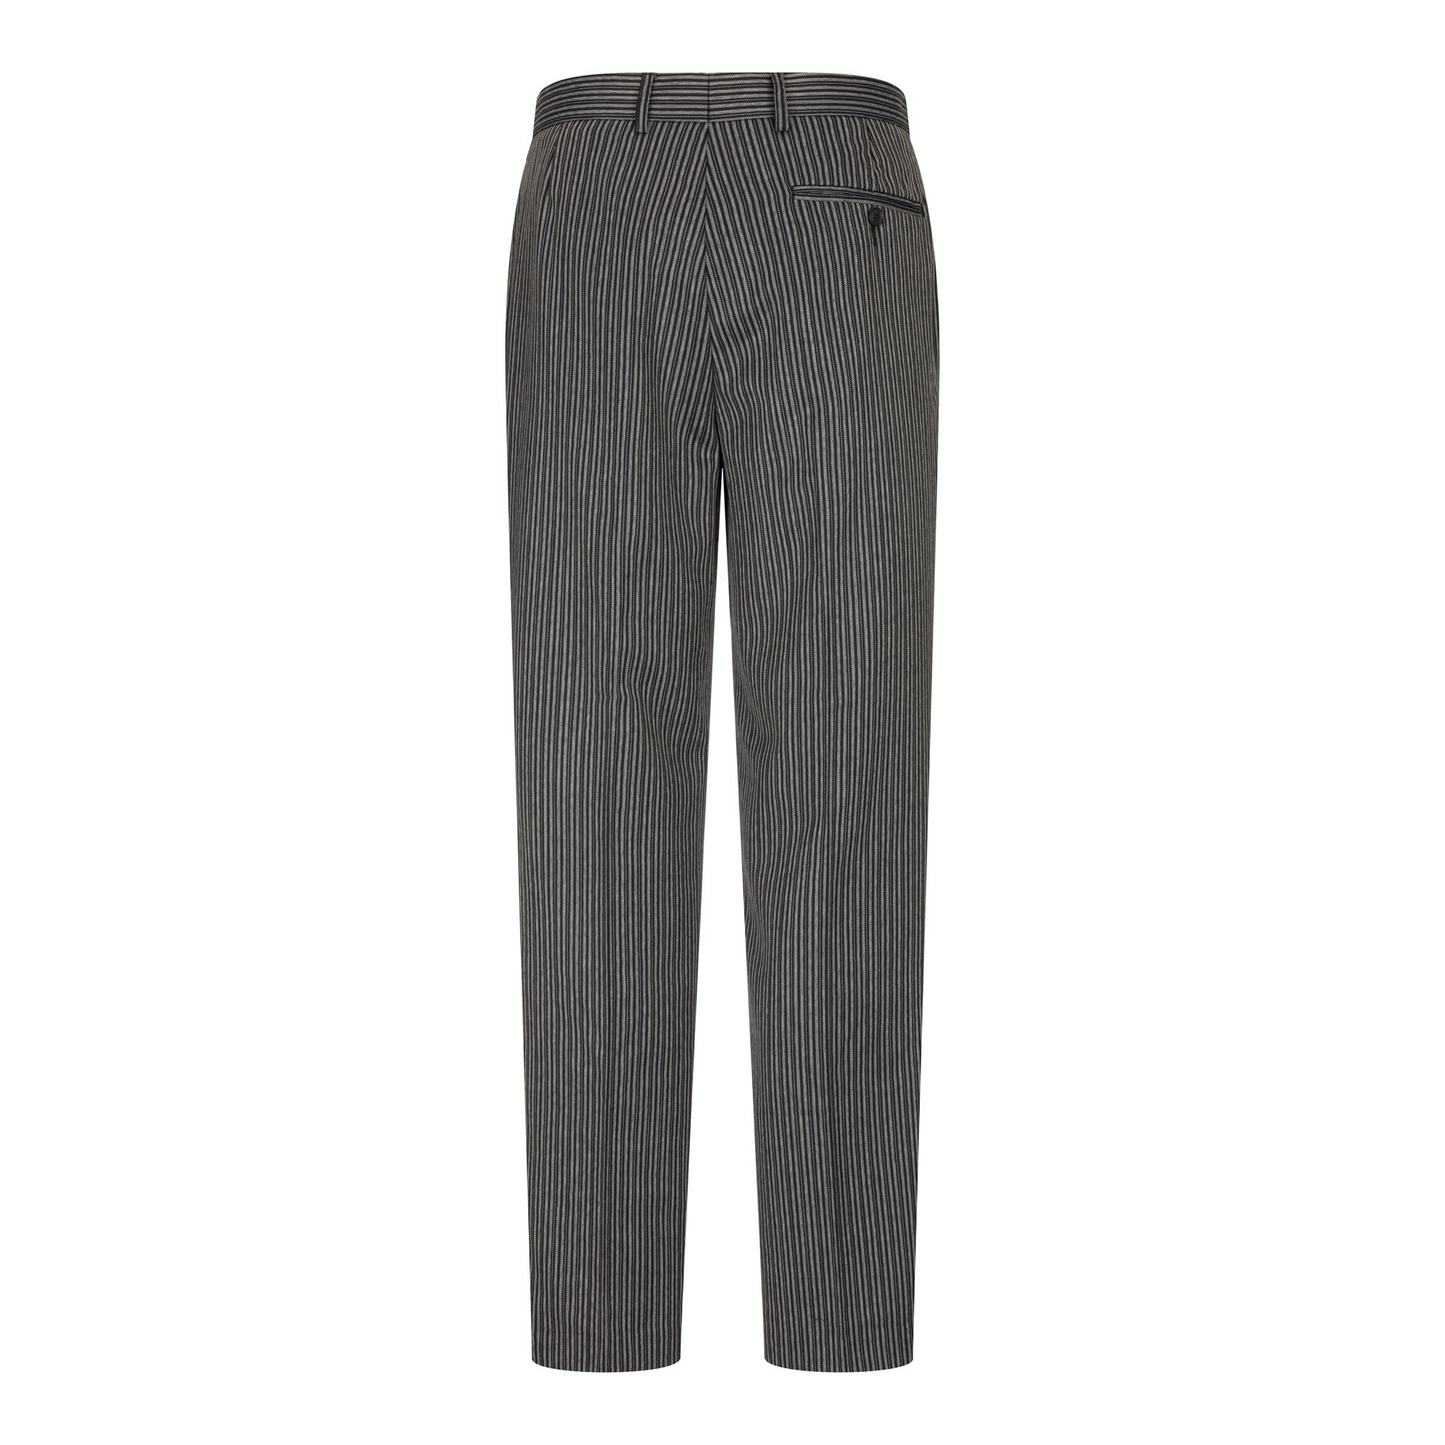 Men's Pinstripe Morning Trousers with Black & Grey Stripe - New